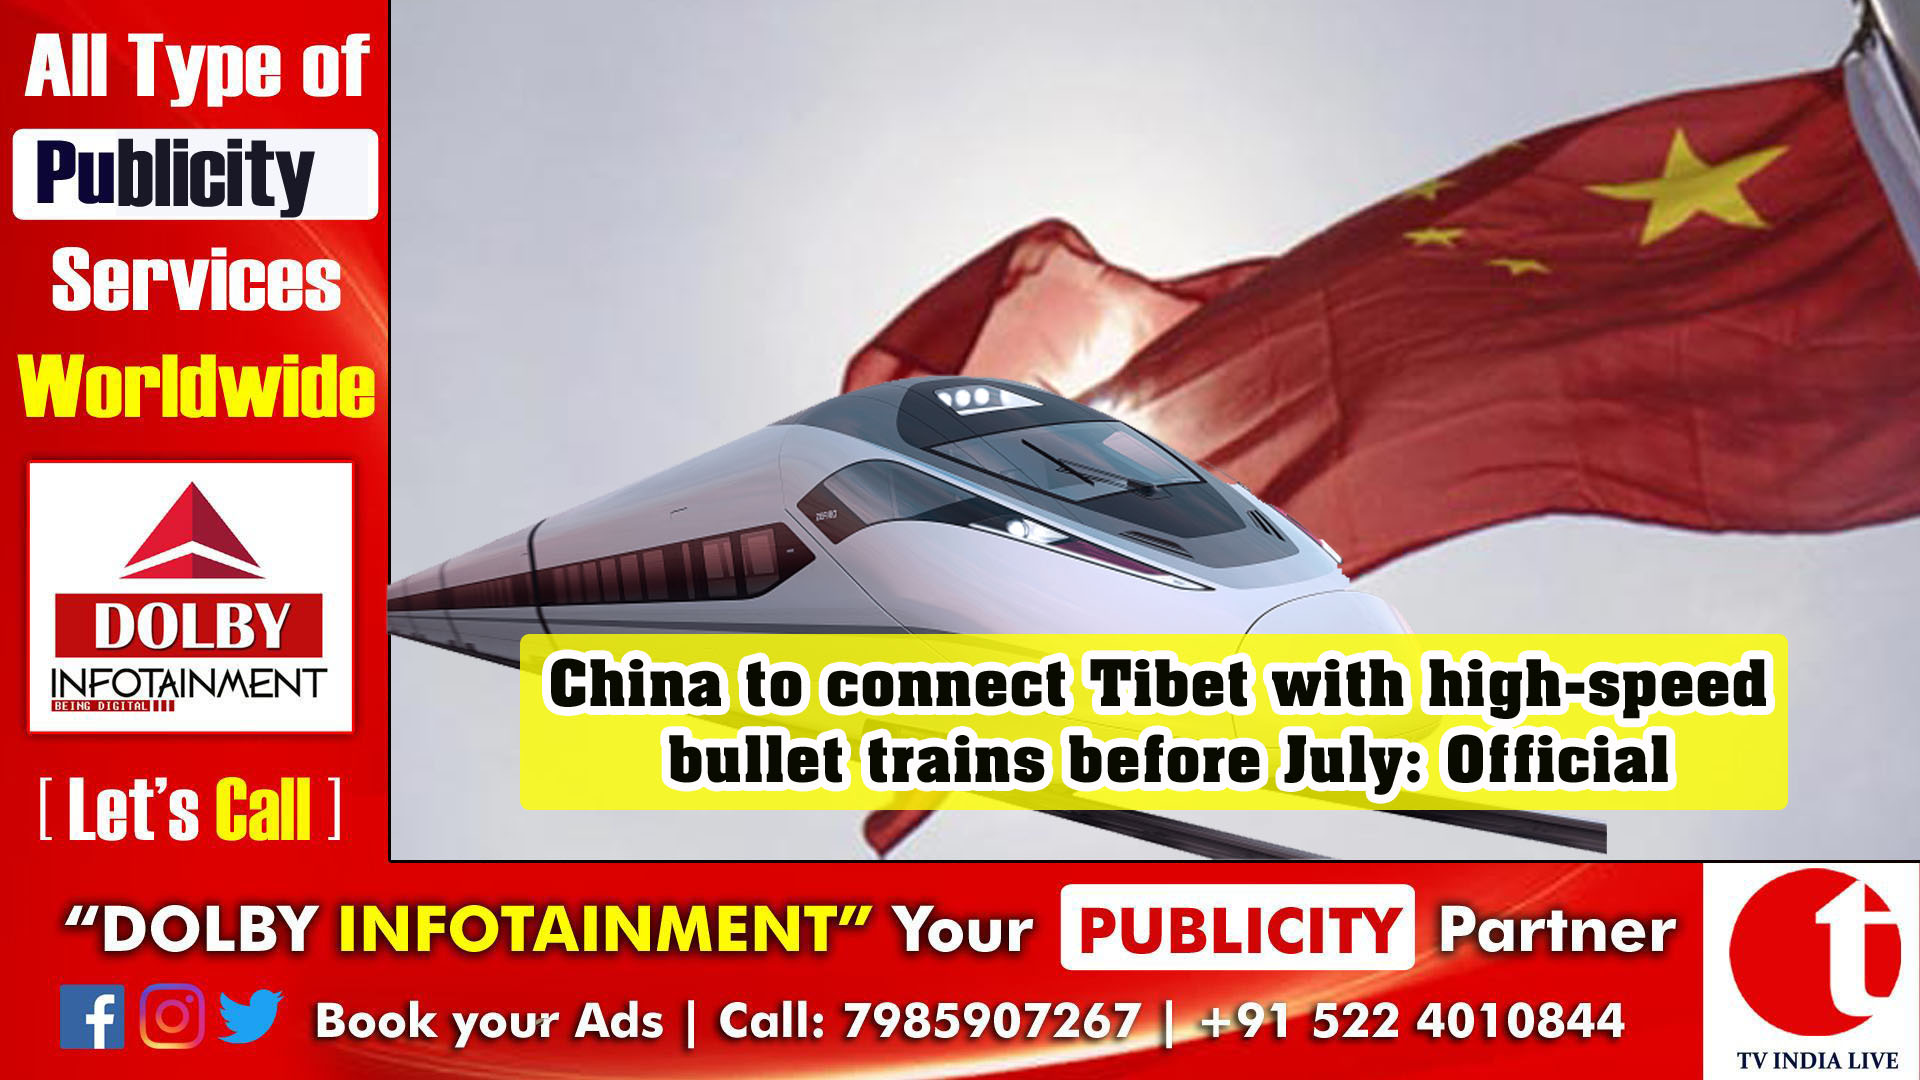 China to connect Tibet with high-speed bullet trains before July: Official